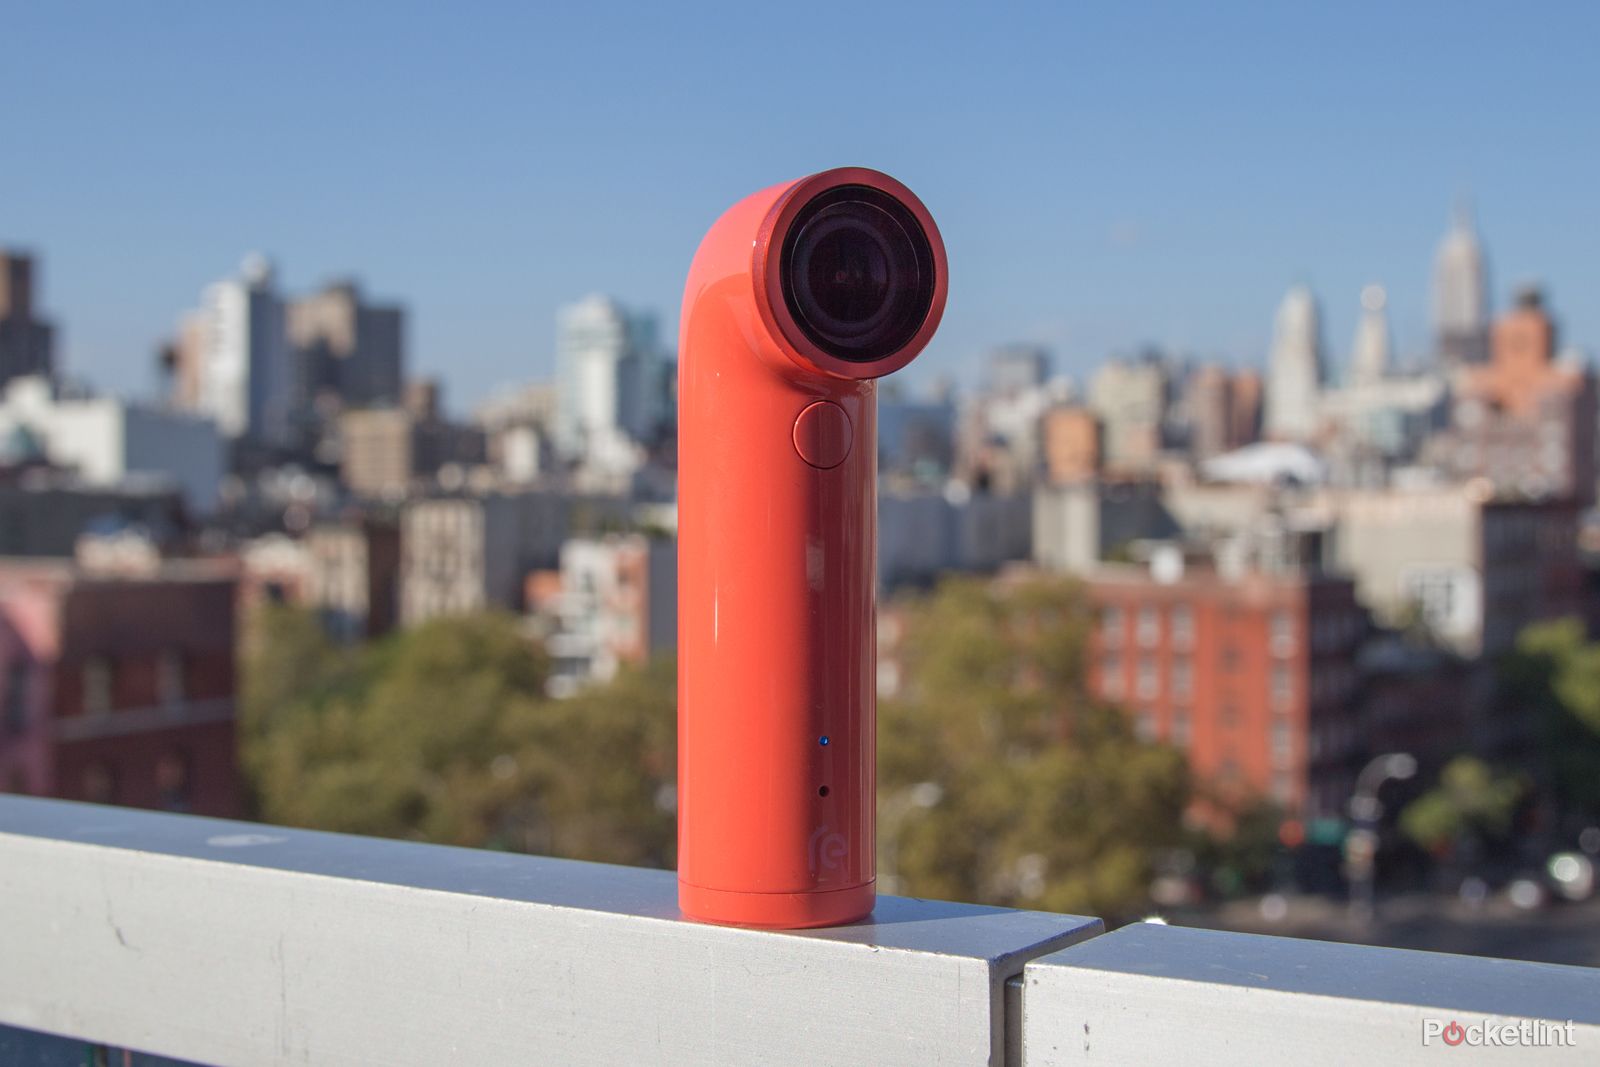 htc re camera previewing the new connected camera image 1